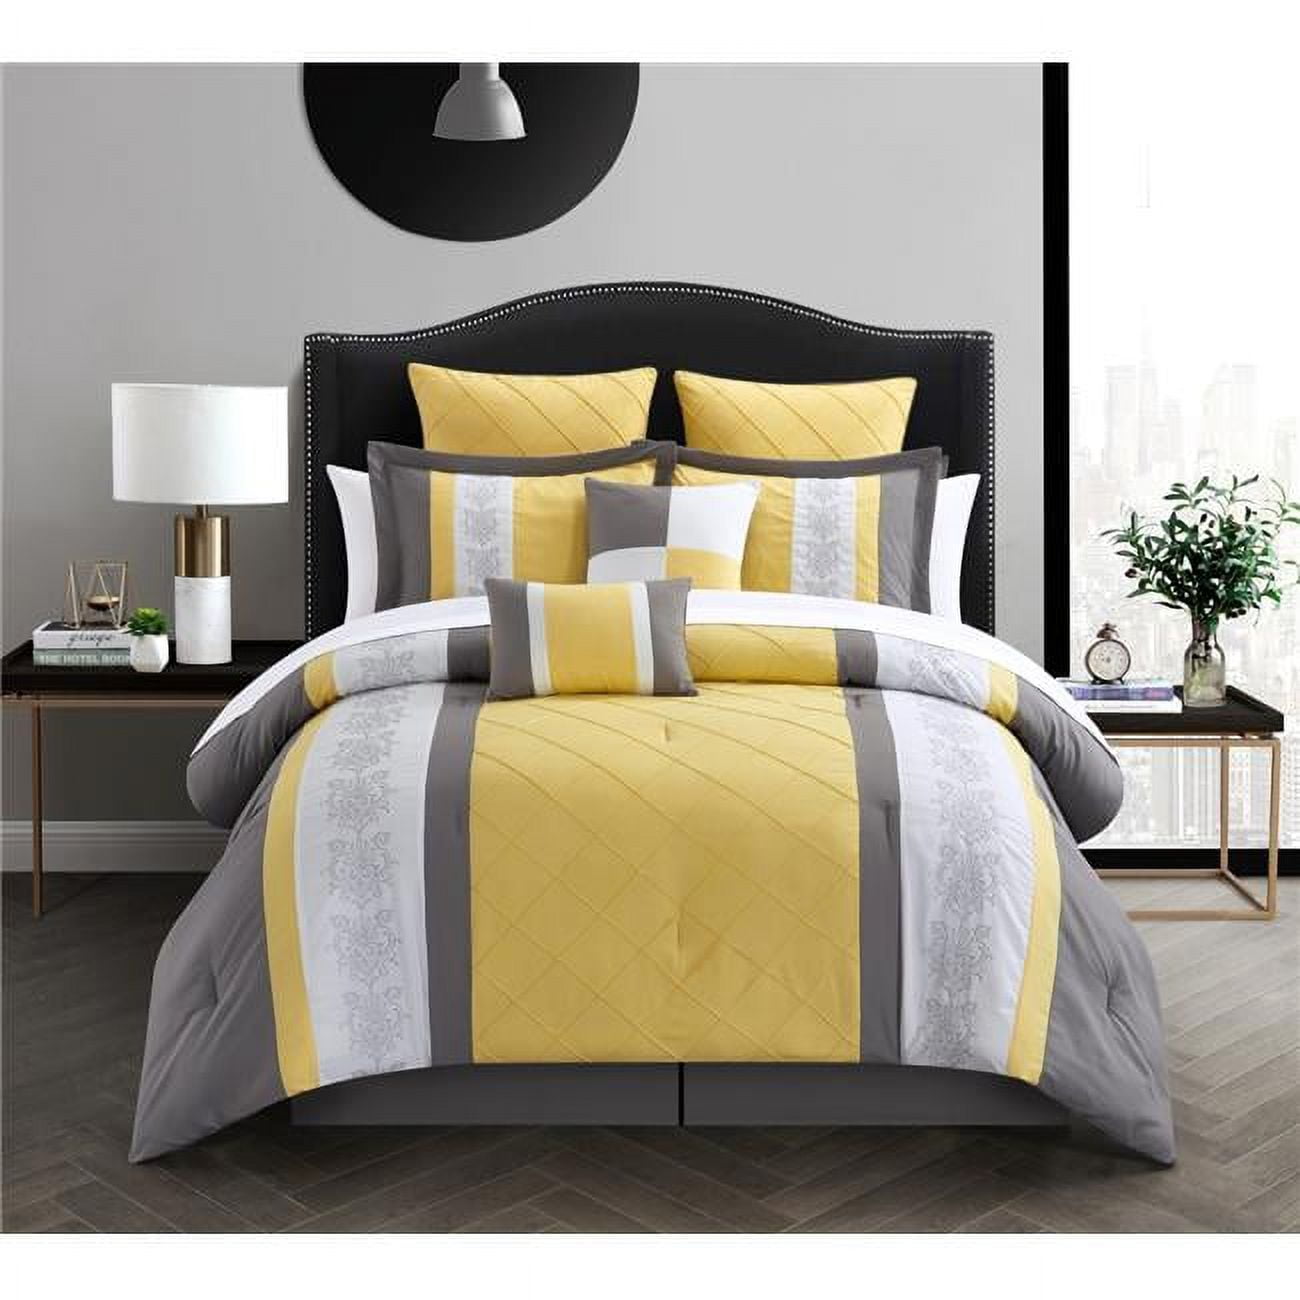 35-89-q-11-us Livingston 12 Piece Bed In A Bag Embroidered Comforter Set With 4 Piece Sheet Set, Yellow - Queen